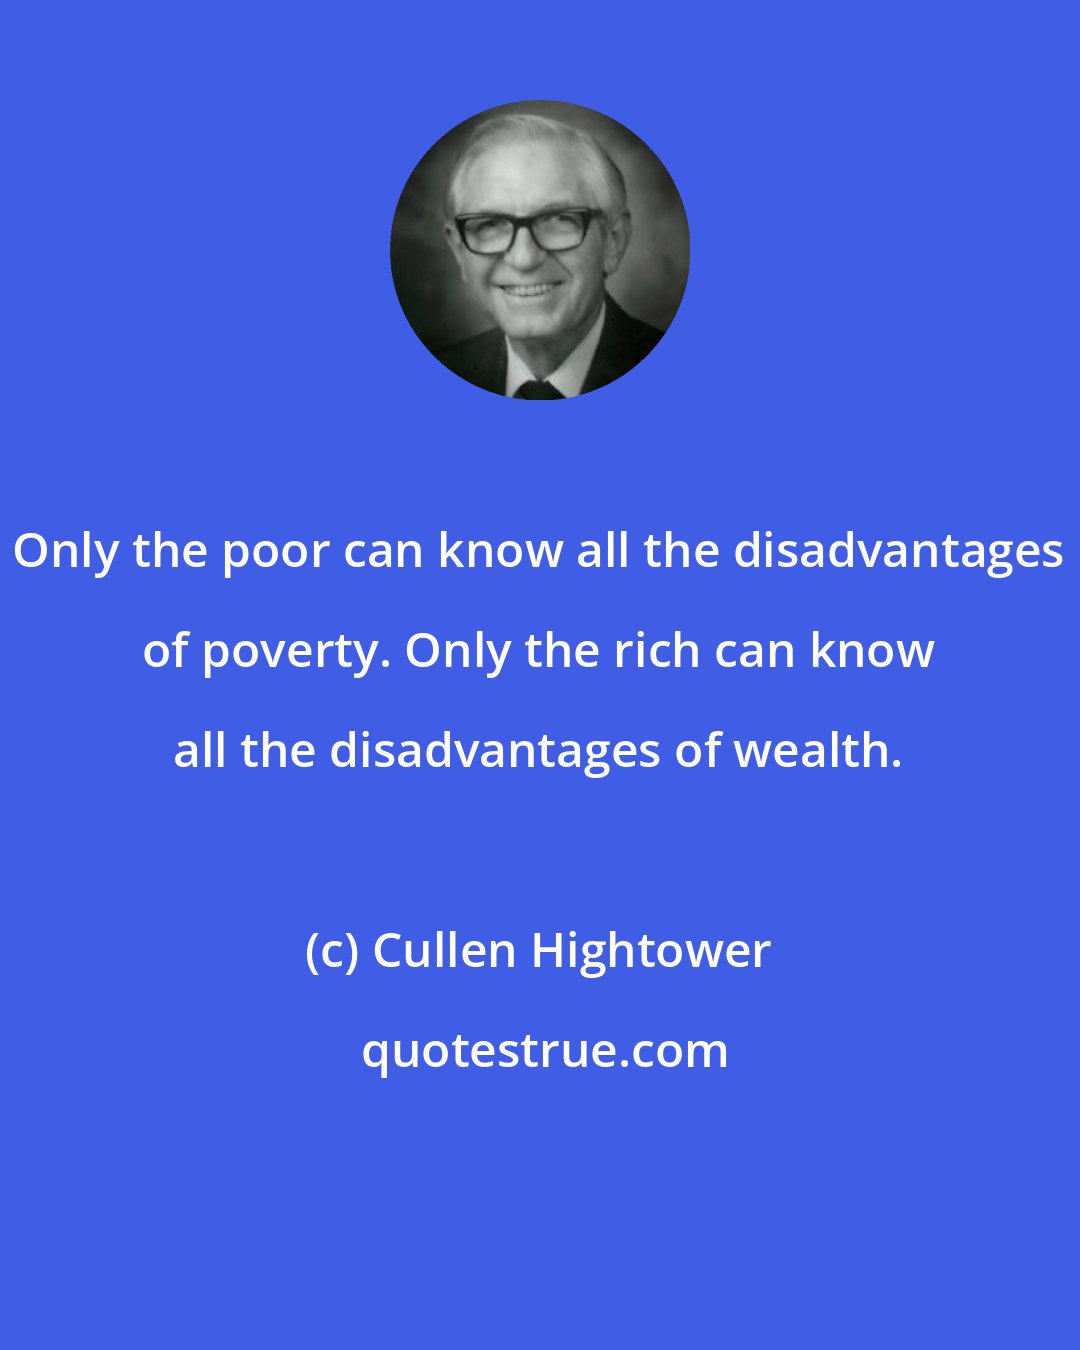 Cullen Hightower: Only the poor can know all the disadvantages of poverty. Only the rich can know all the disadvantages of wealth.